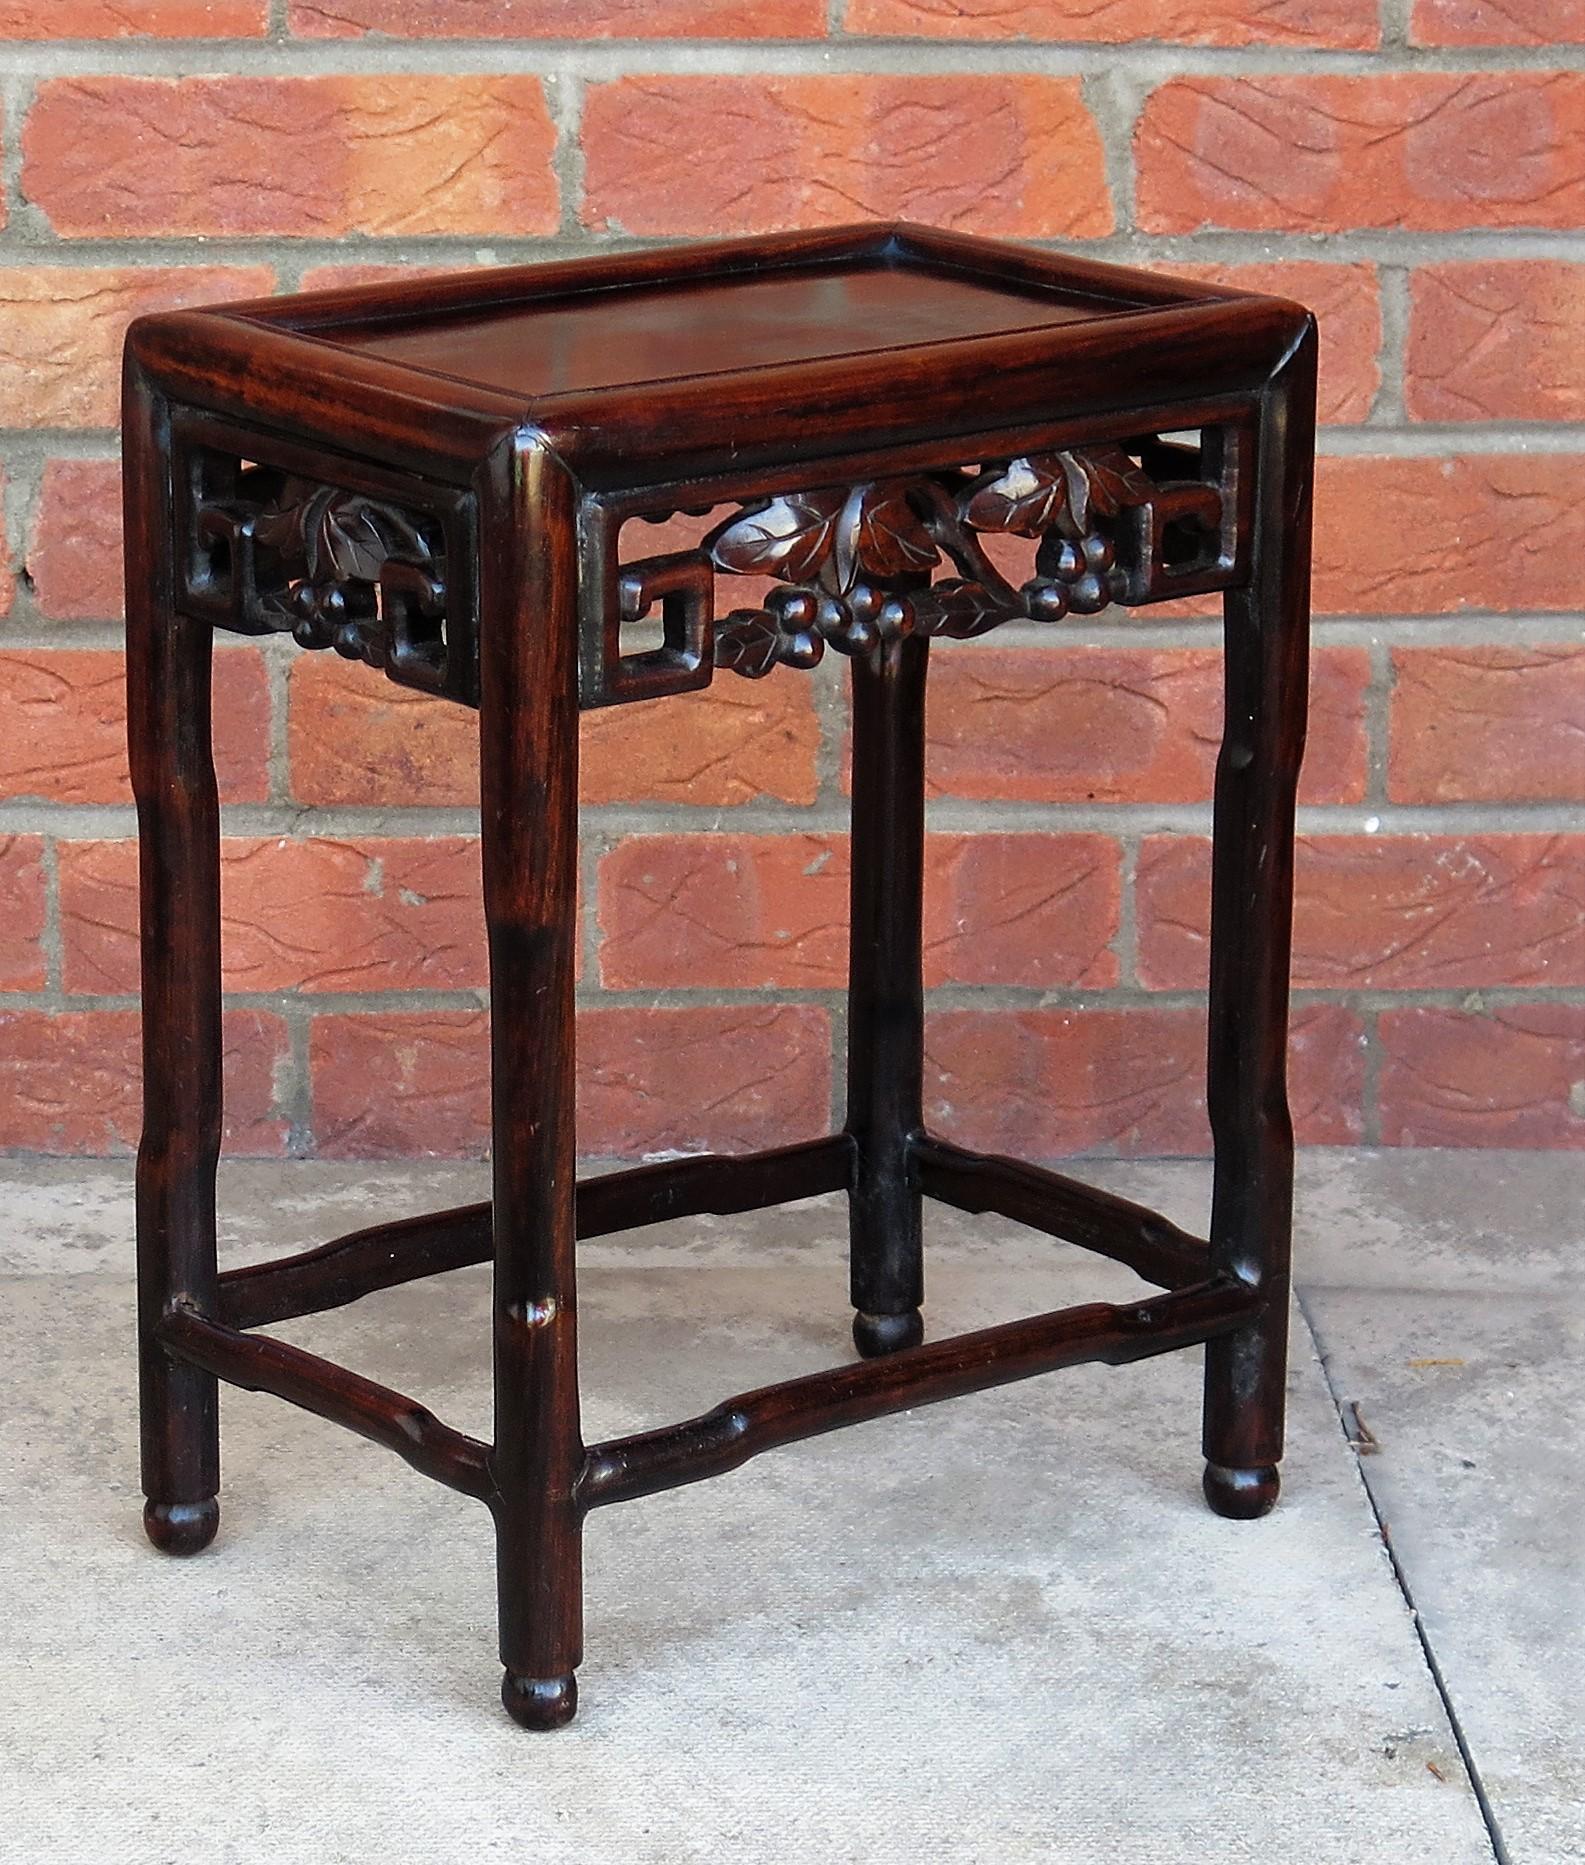 This is a Chinese handmade Hongmu hardwood side table with a finely carved frieze, dating to the second half of the 19th century, Qing period.

The table has a mitred inset figured rectangular top with a raised beeded surround, over a very well hand